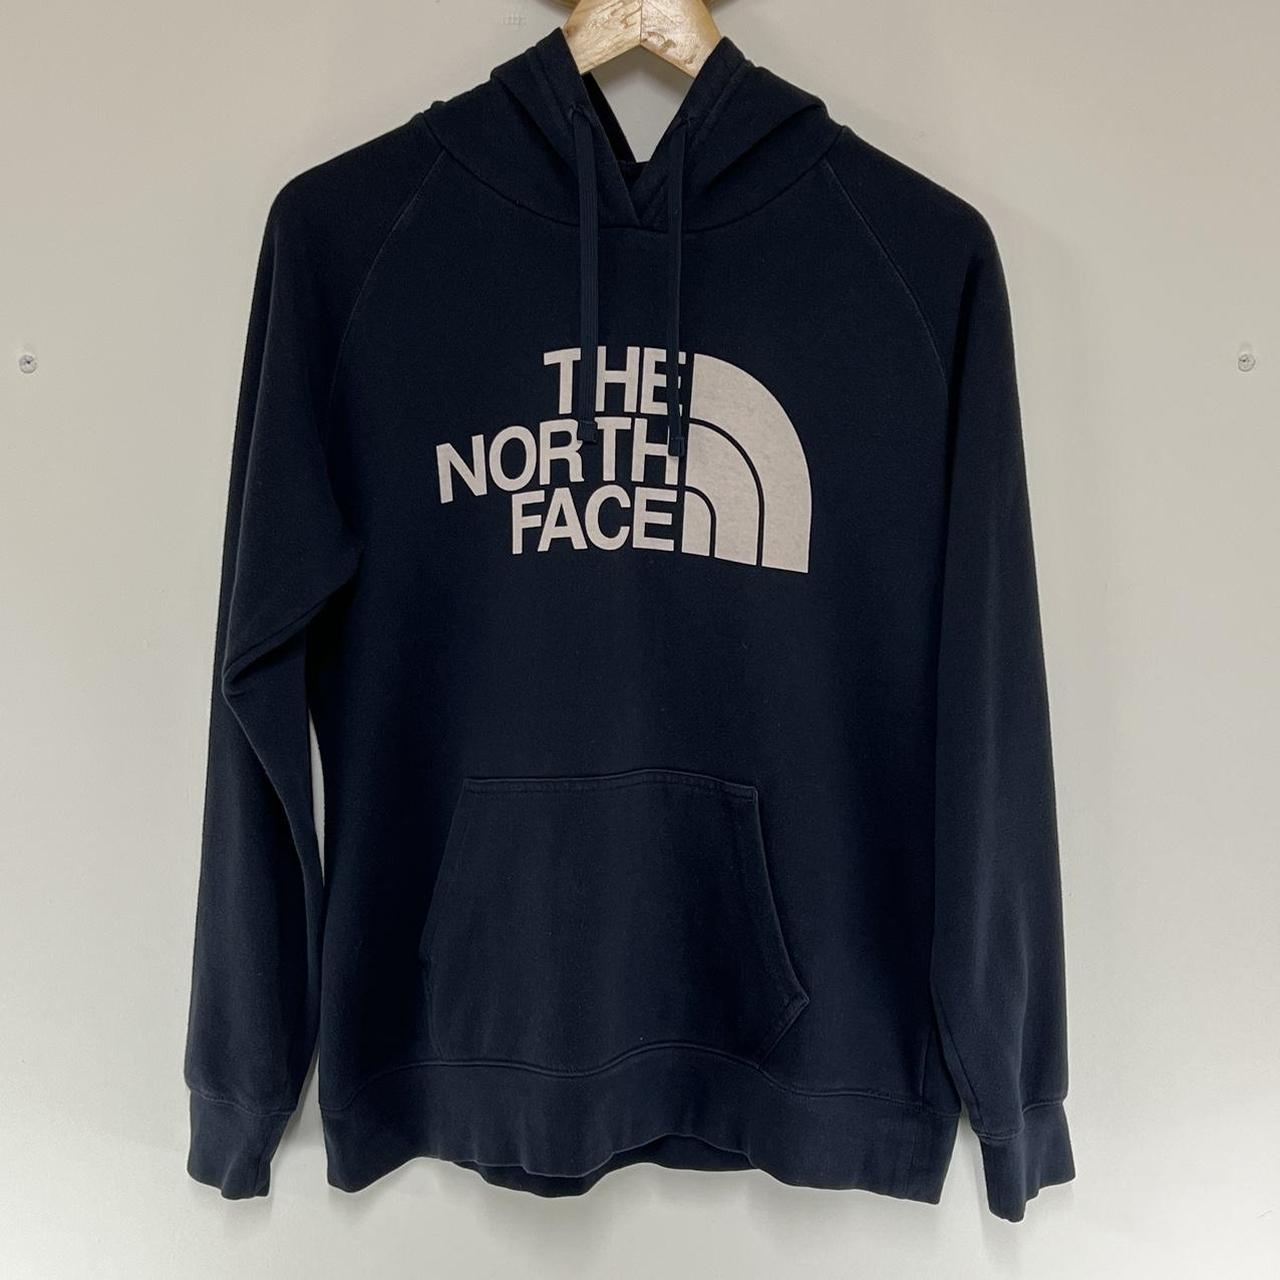 The North Face Hoodie 🔥 Pit to pit- 23 inch Collar... - Depop